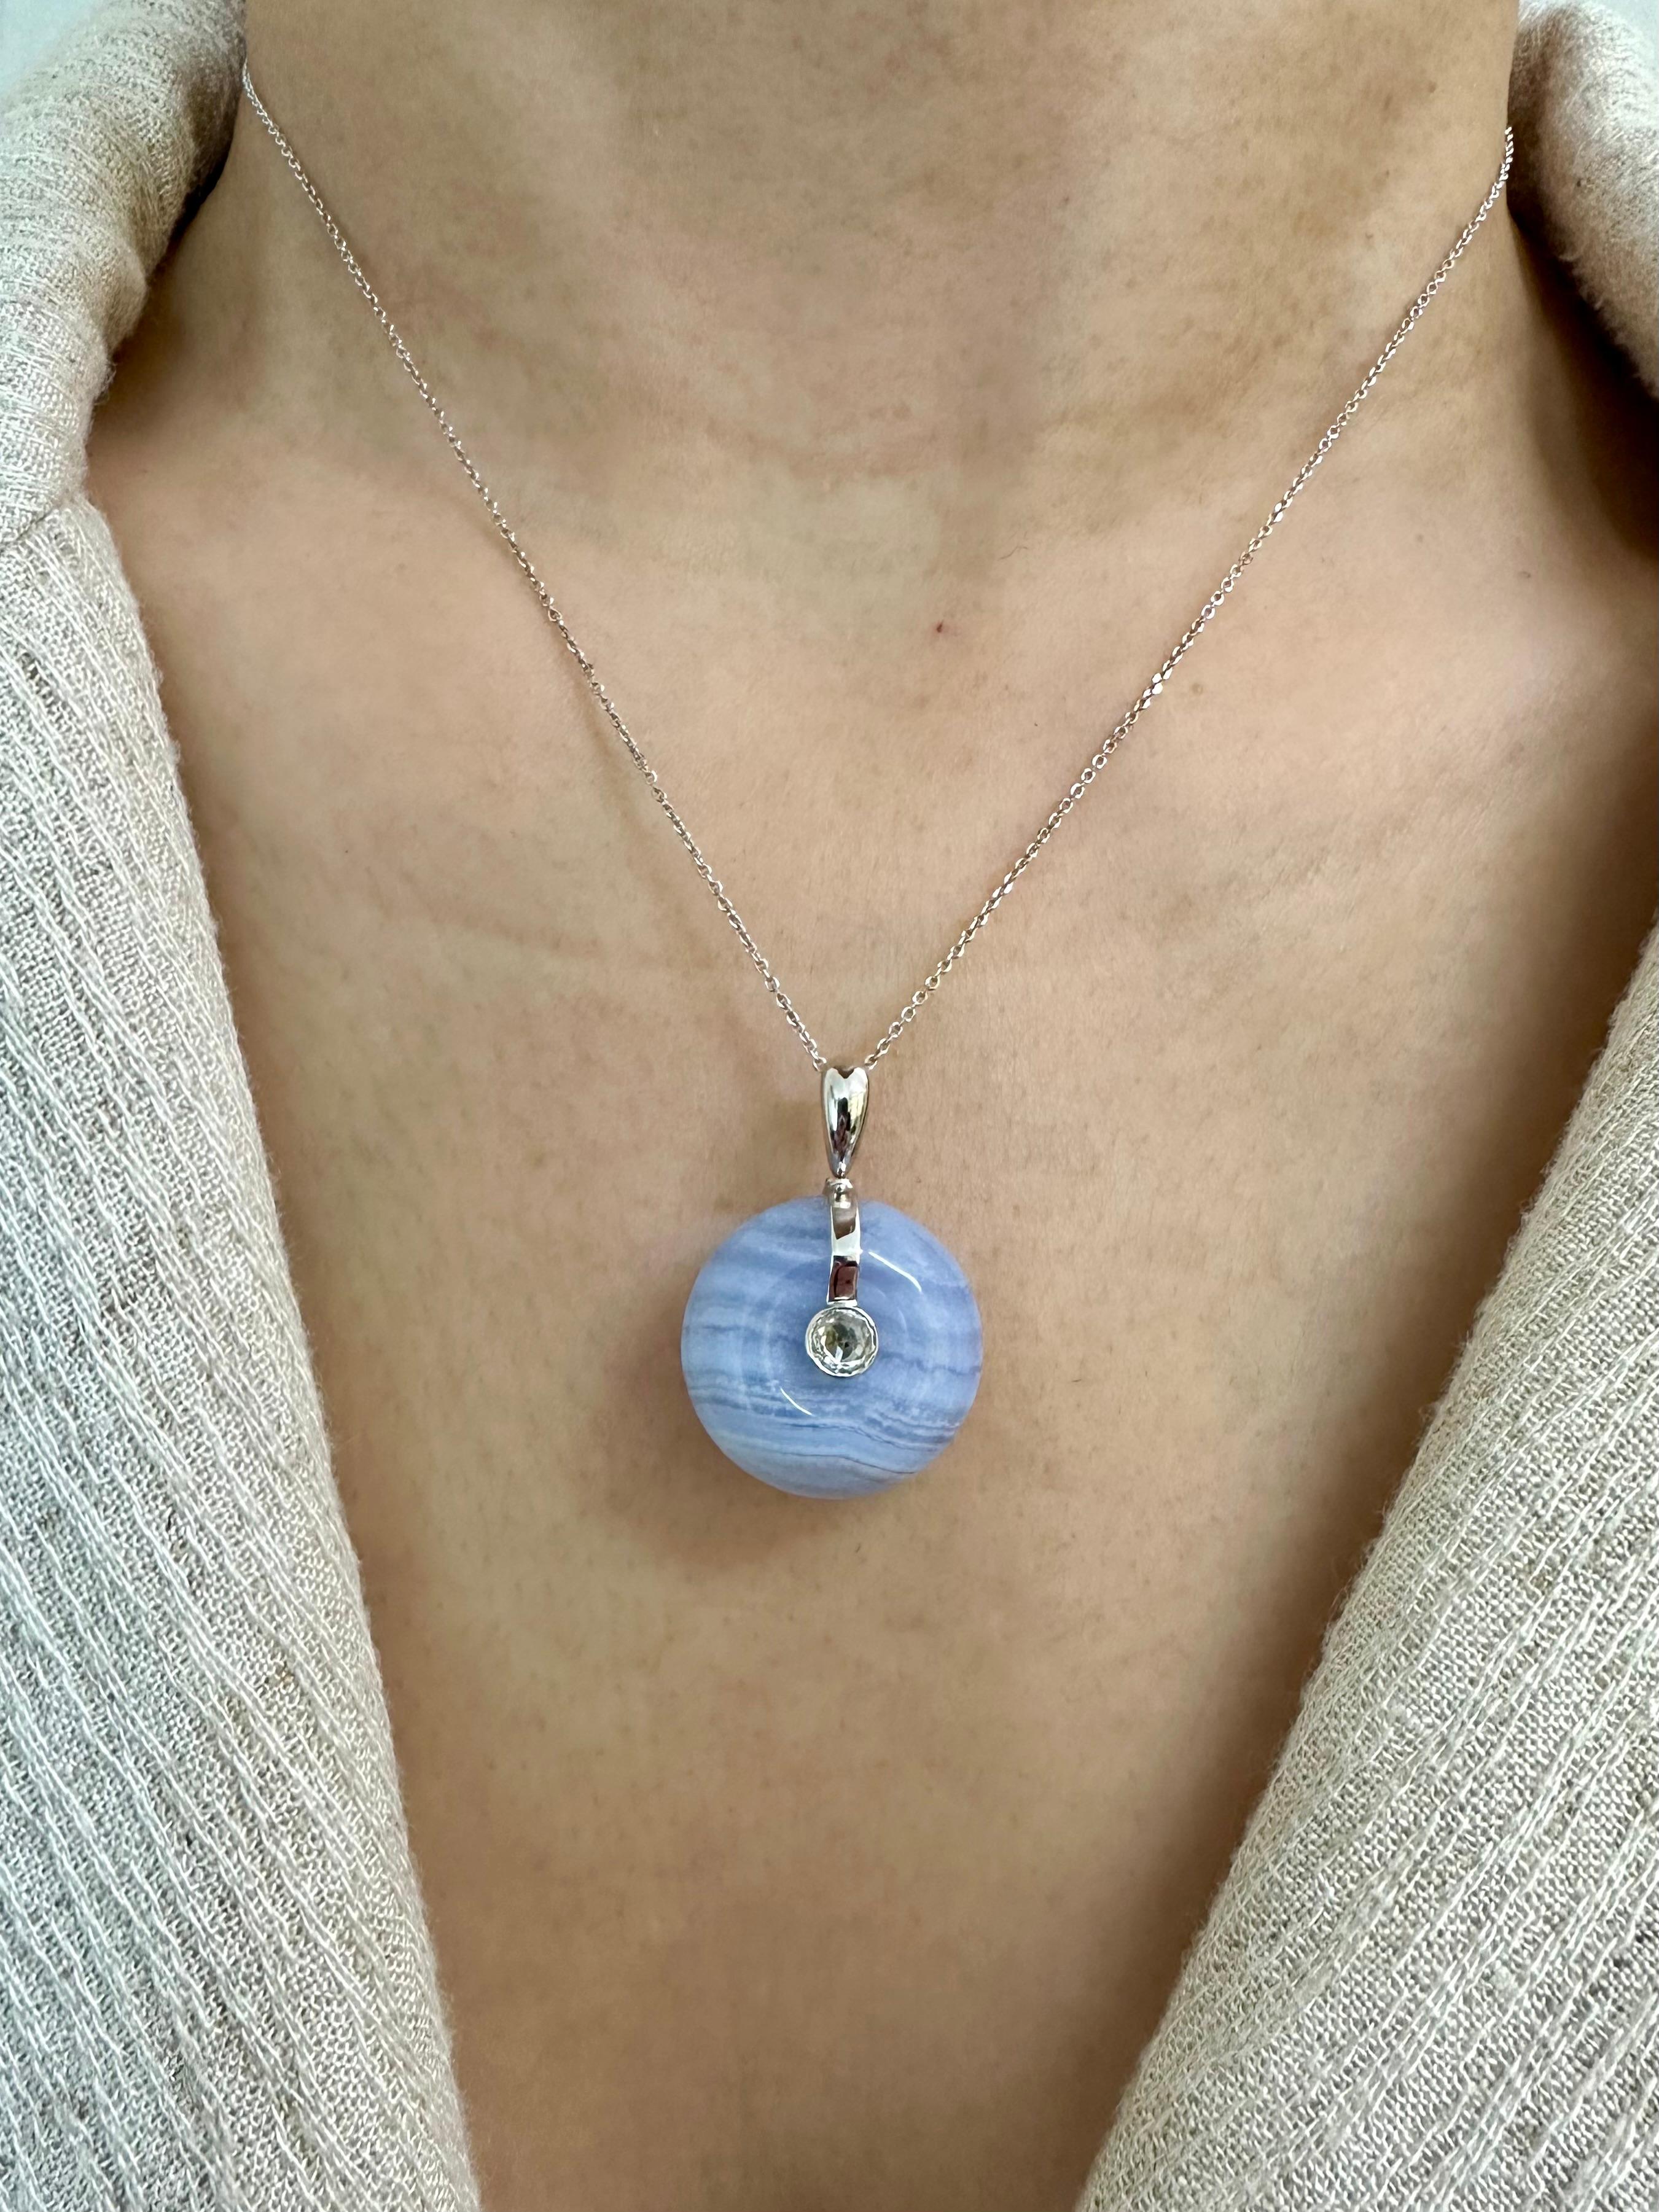 Please check out the HD video. This pendant can be worn on both sides for a different look. The pendant is set in 18k white gold. The lavender Agate which is also a type of Chalcedony is about 1.8cm in diameter and weights 20.47 Cts . The natural